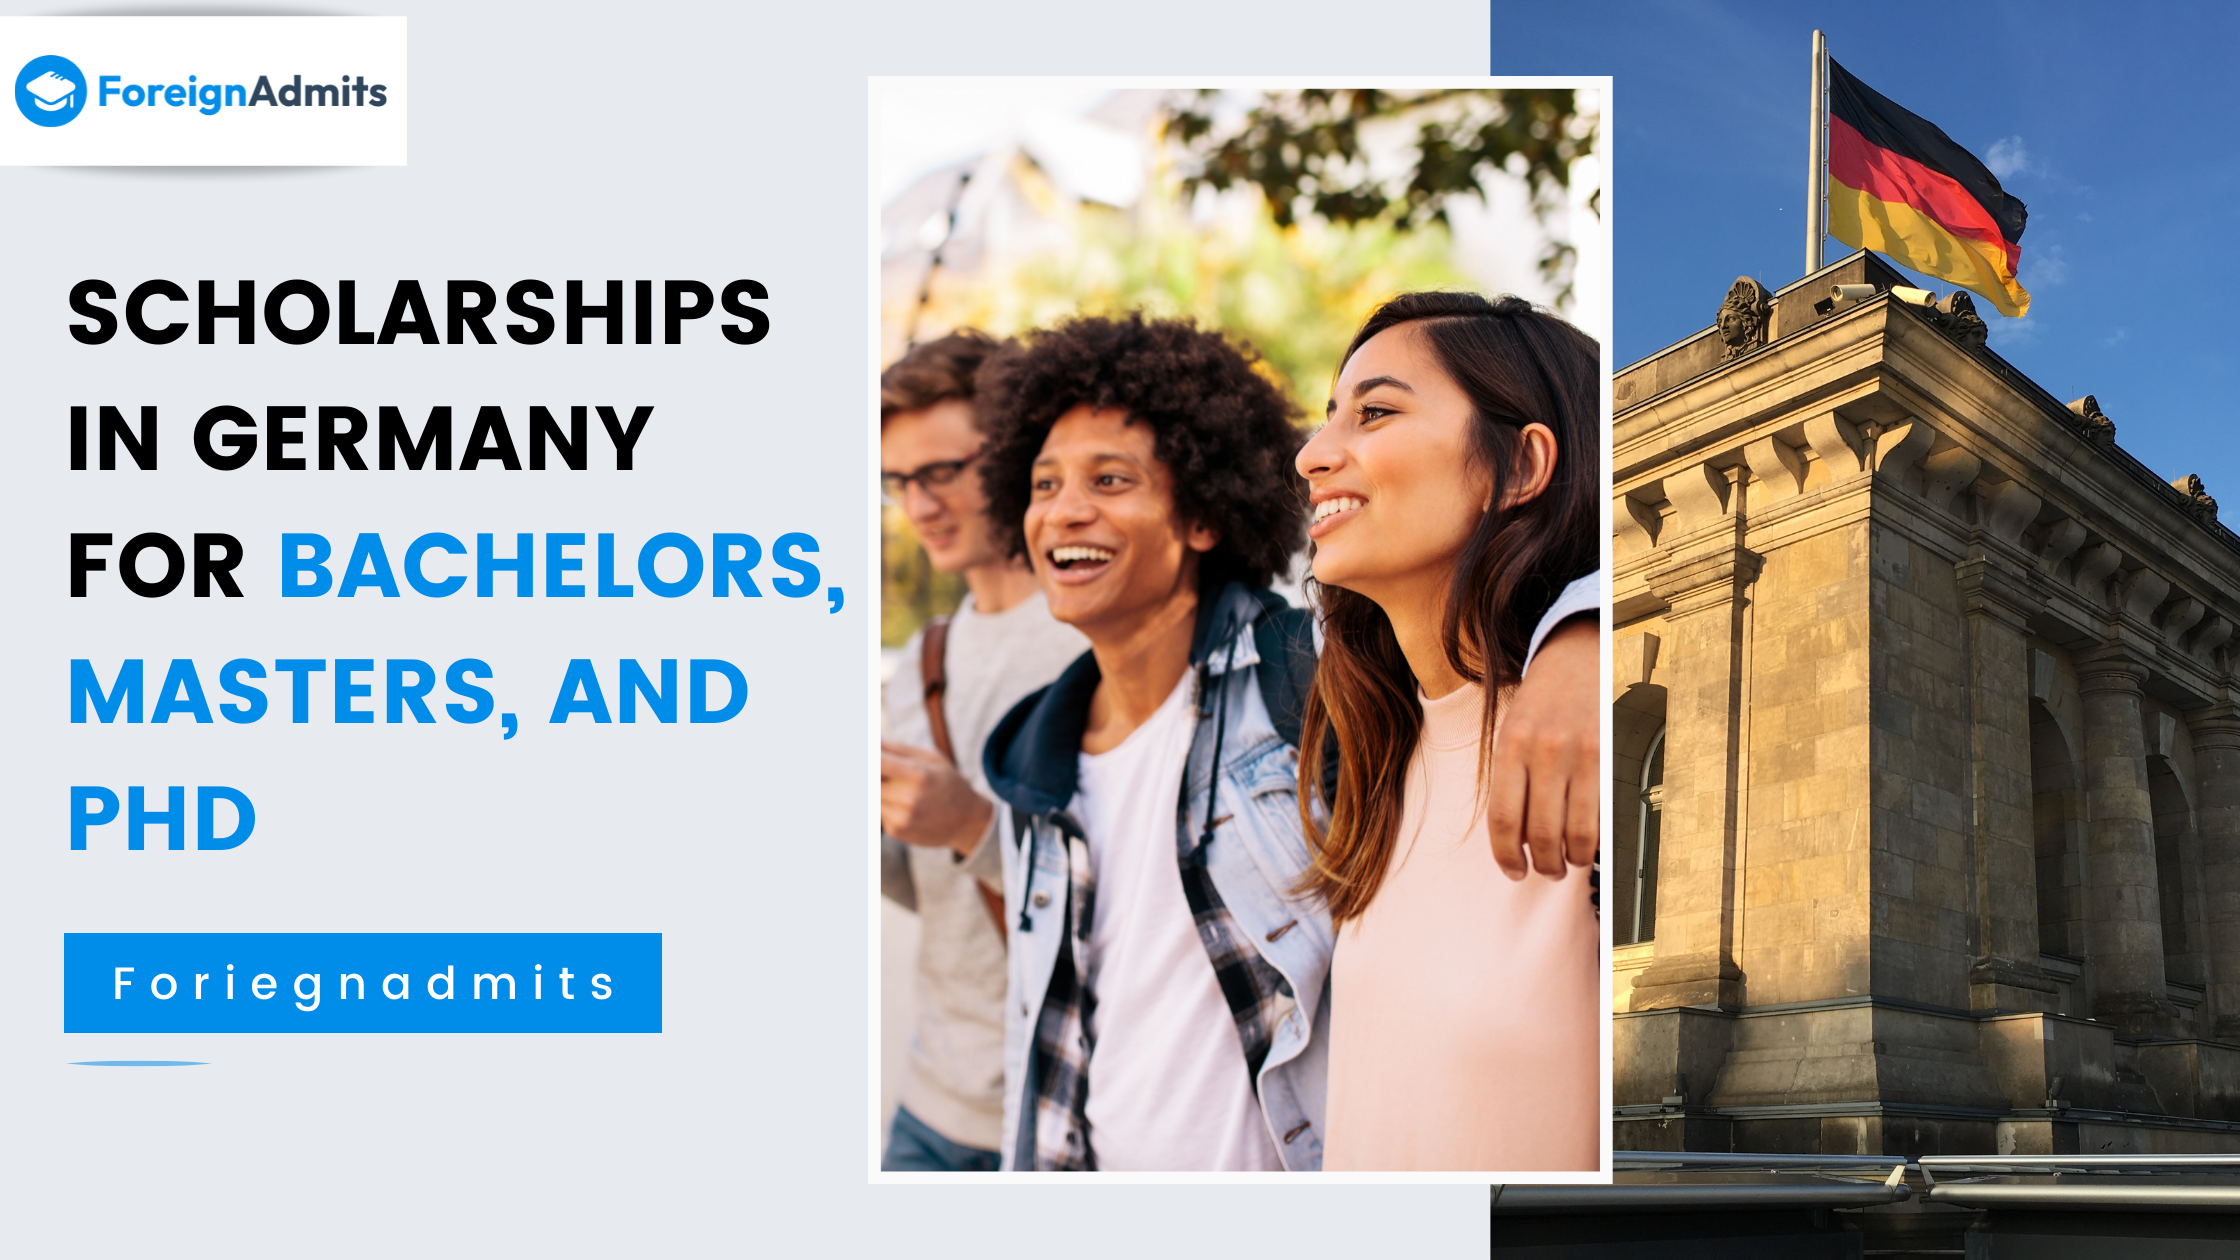 Scholarships in Germany for Bachelors, Masters, and PhD